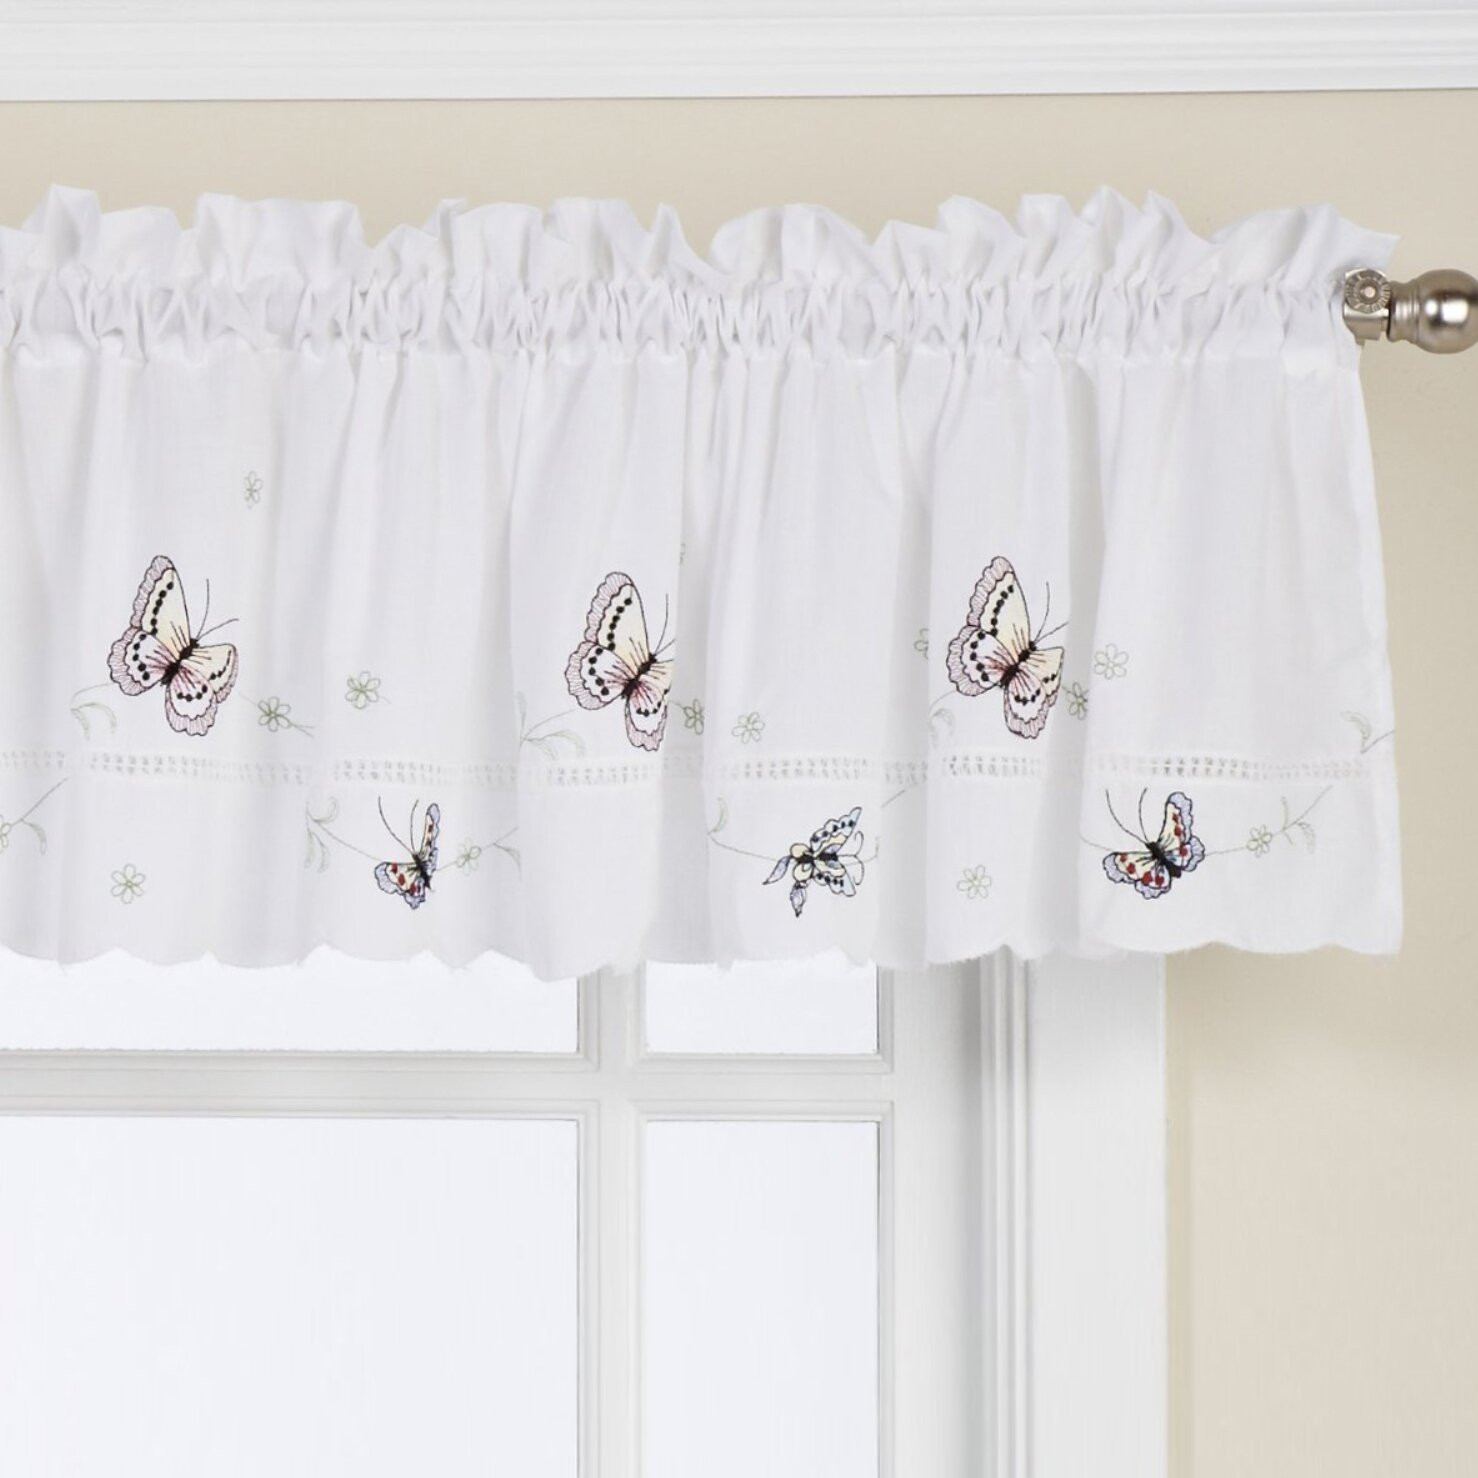 Butterfly Kitchen Curtains
 Sweet Home Collection Monarch Embroidered Butterfly